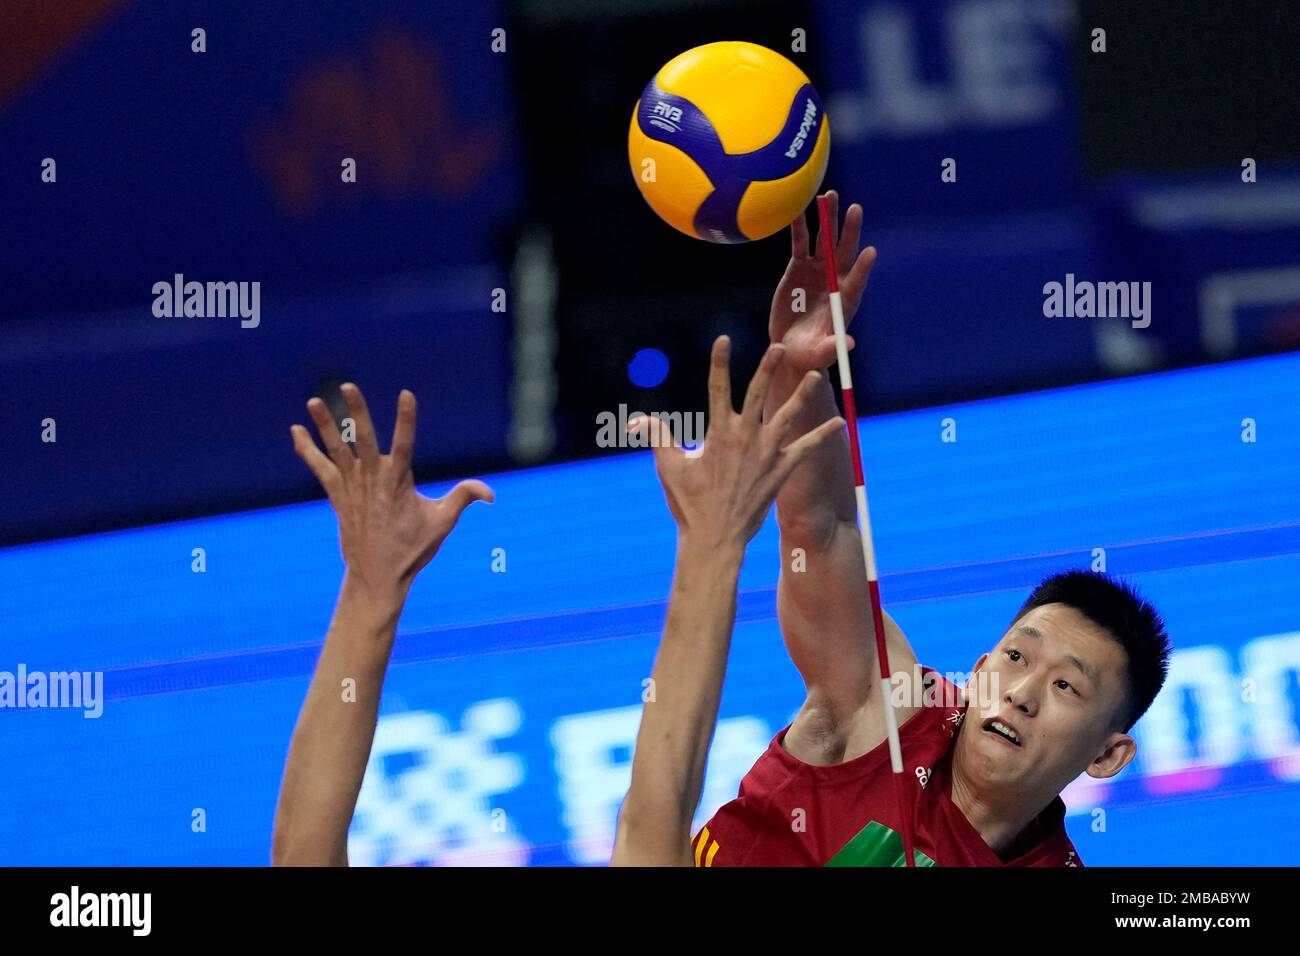 Chinas Zhang spikes the ball during mens Nations League volleyball match against Iran, in Brasilia, Brazil, Tuesday, June 7, 2022